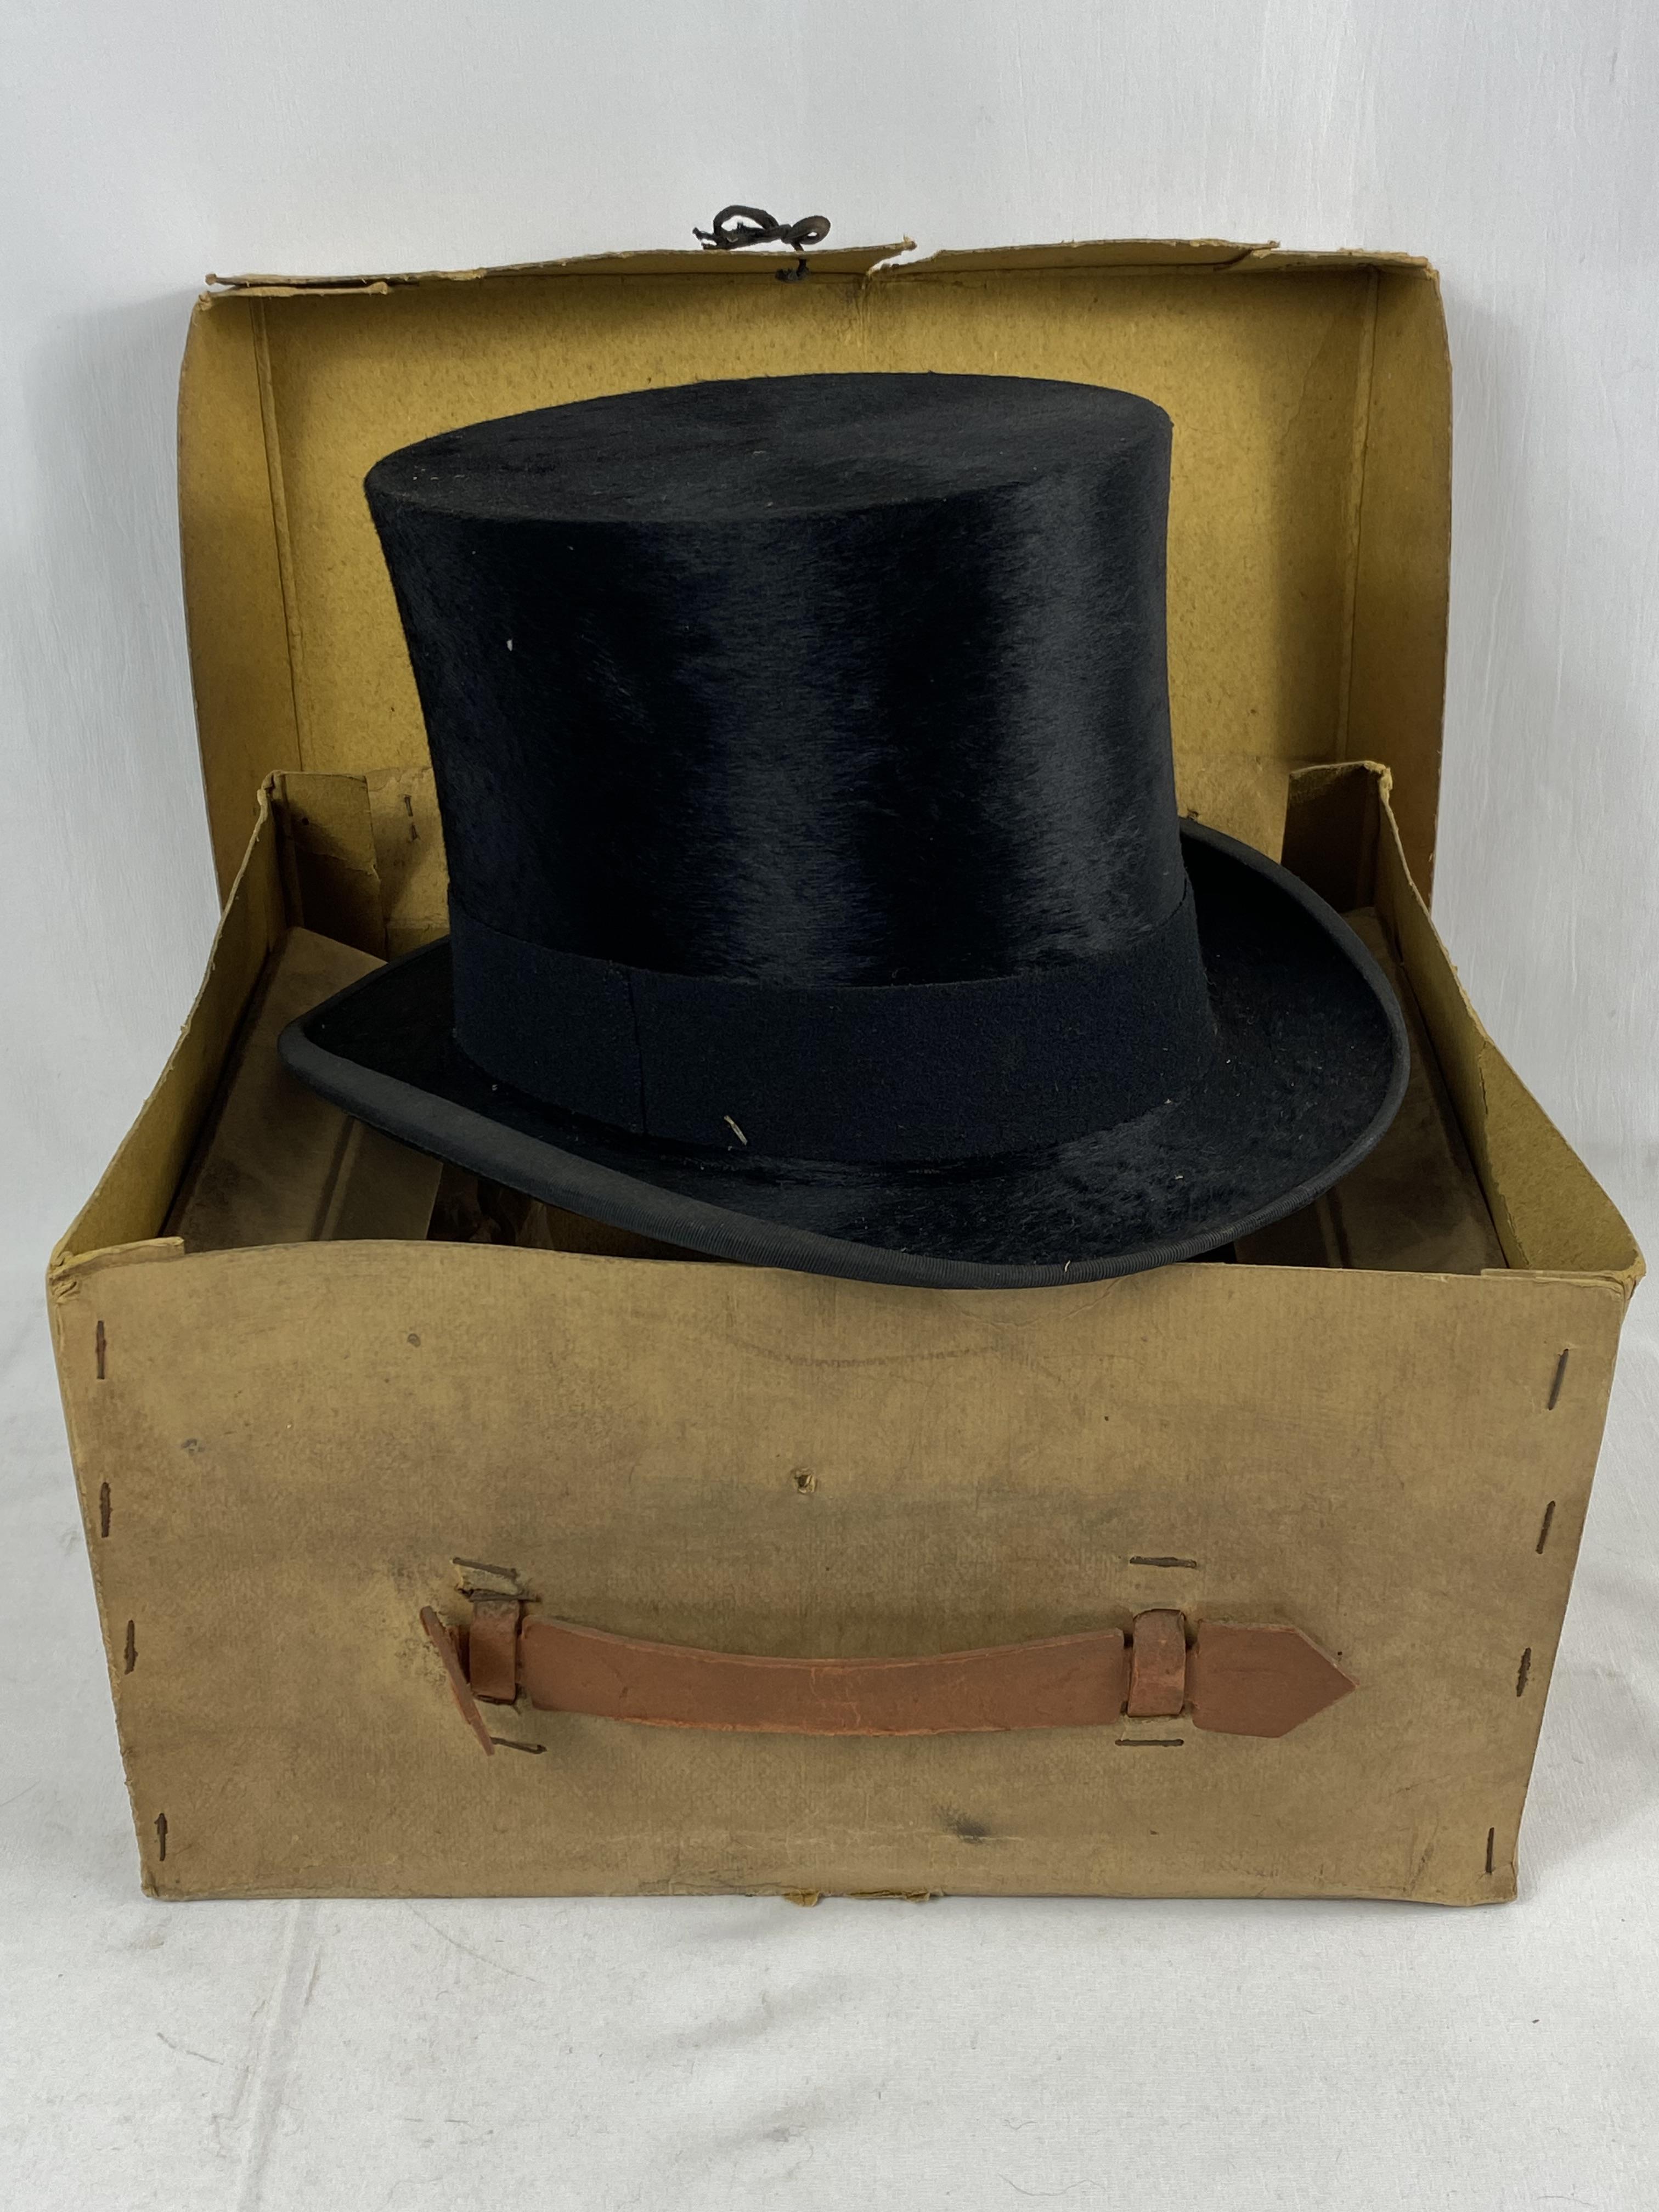 Dunn & Co childs silk top hat - Image 2 of 7